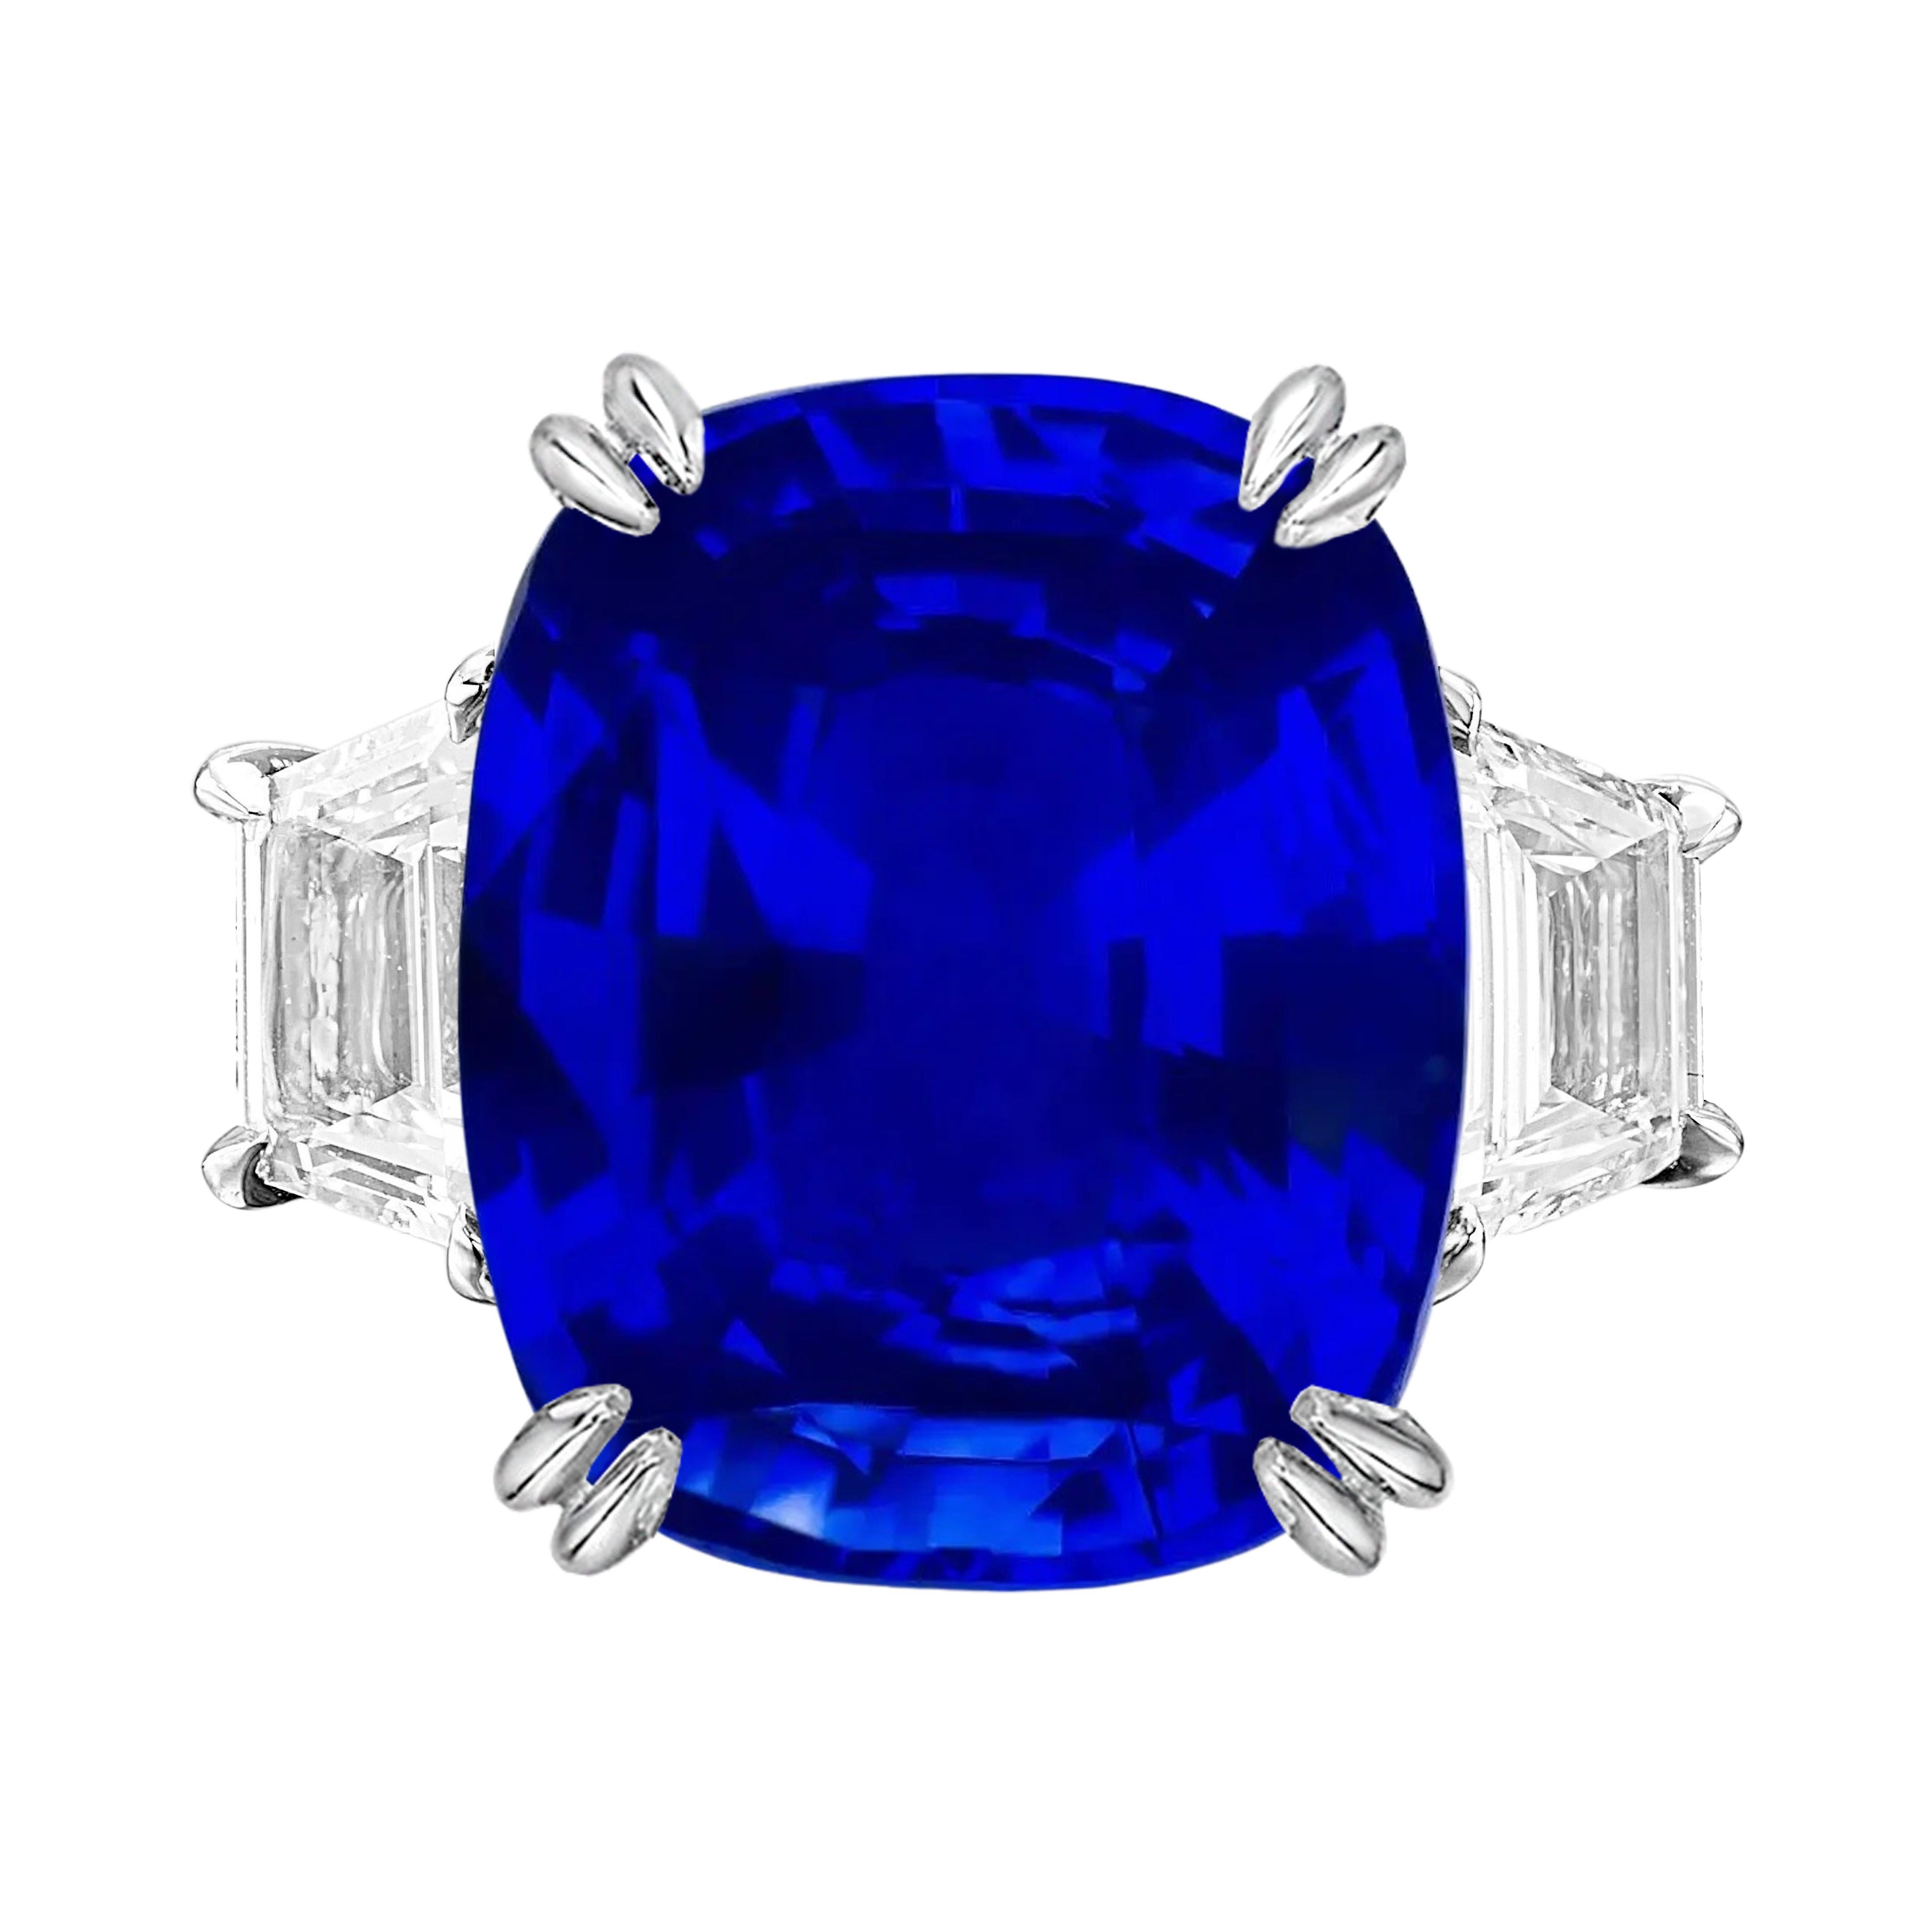 This important ring dating from the mid to late 20th century centers a  antique cushion-cut  sapphire weighing 7 carats, set in platinum and flanked by straight tapezoid diamond . It is accompanied by a report from  SSEF Switzerland Laboratories